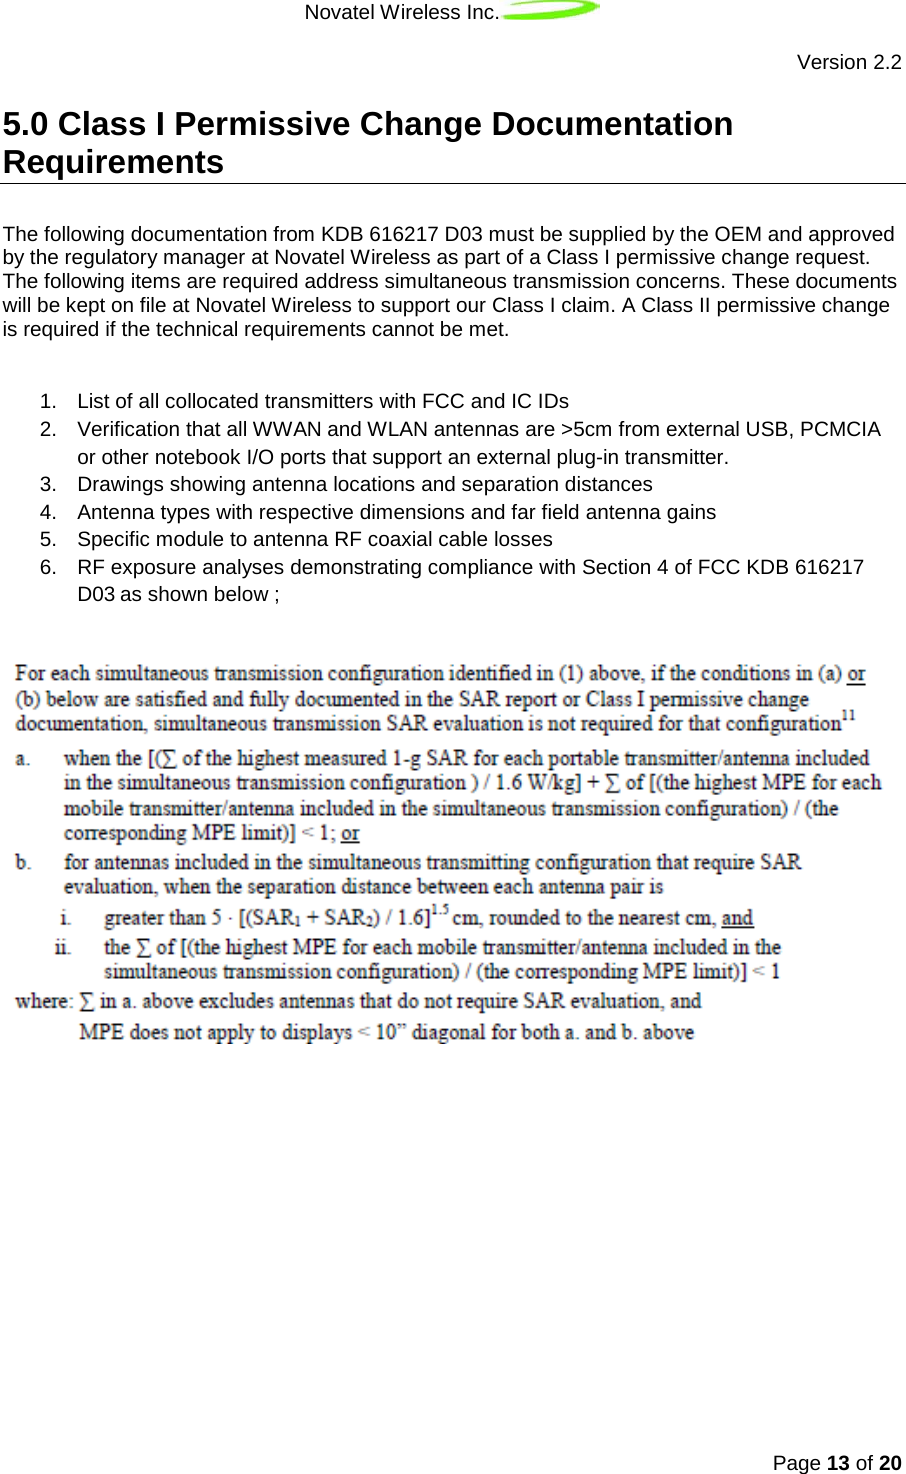 Novatel Wireless Inc.   Version 2.2 Page 13 of 20   5.0 Class I Permissive Change Documentation Requirements The following documentation from KDB 616217 D03 must be supplied by the OEM and approved by the regulatory manager at Novatel Wireless as part of a Class I permissive change request.  The following items are required address simultaneous transmission concerns. These documents will be kept on file at Novatel Wireless to support our Class I claim. A Class II permissive change is required if the technical requirements cannot be met.   1. List of all collocated transmitters with FCC and IC IDs 2. Verification that all WWAN and WLAN antennas are &gt;5cm from external USB, PCMCIA or other notebook I/O ports that support an external plug-in transmitter. 3. Drawings showing antenna locations and separation distances 4. Antenna types with respective dimensions and far field antenna gains 5. Specific module to antenna RF coaxial cable losses  6. RF exposure analyses demonstrating compliance with Section 4 of FCC KDB 616217 D03 as shown below ; 